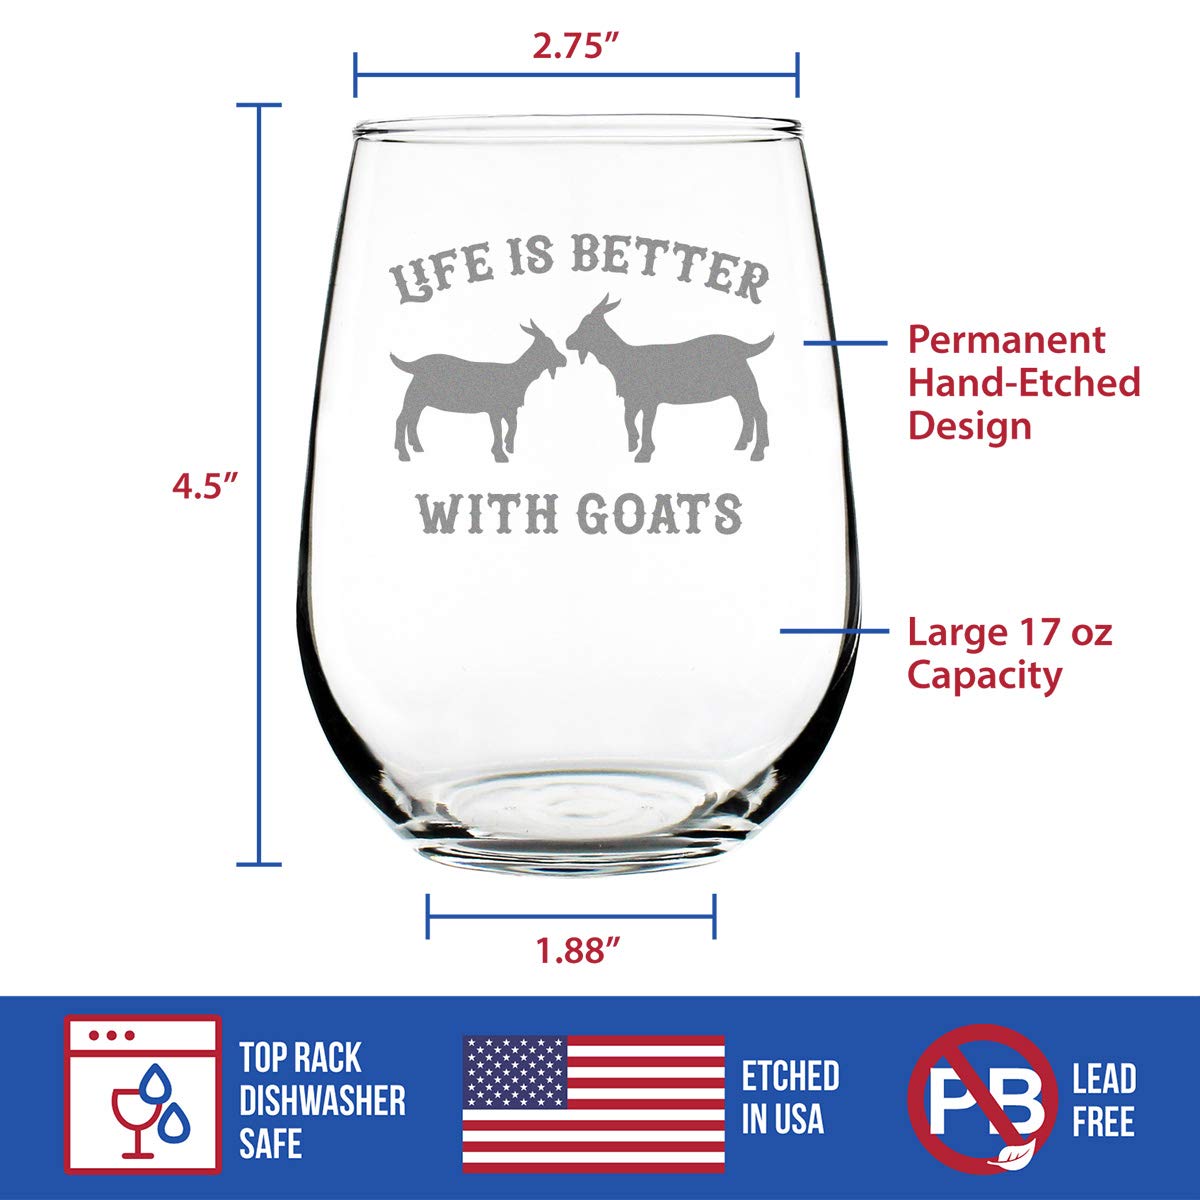 Life Is Better With Goats - Stemless Wine Glass - Funny Farm Animal Themed Decor and Gifts - Large 17 Ounce